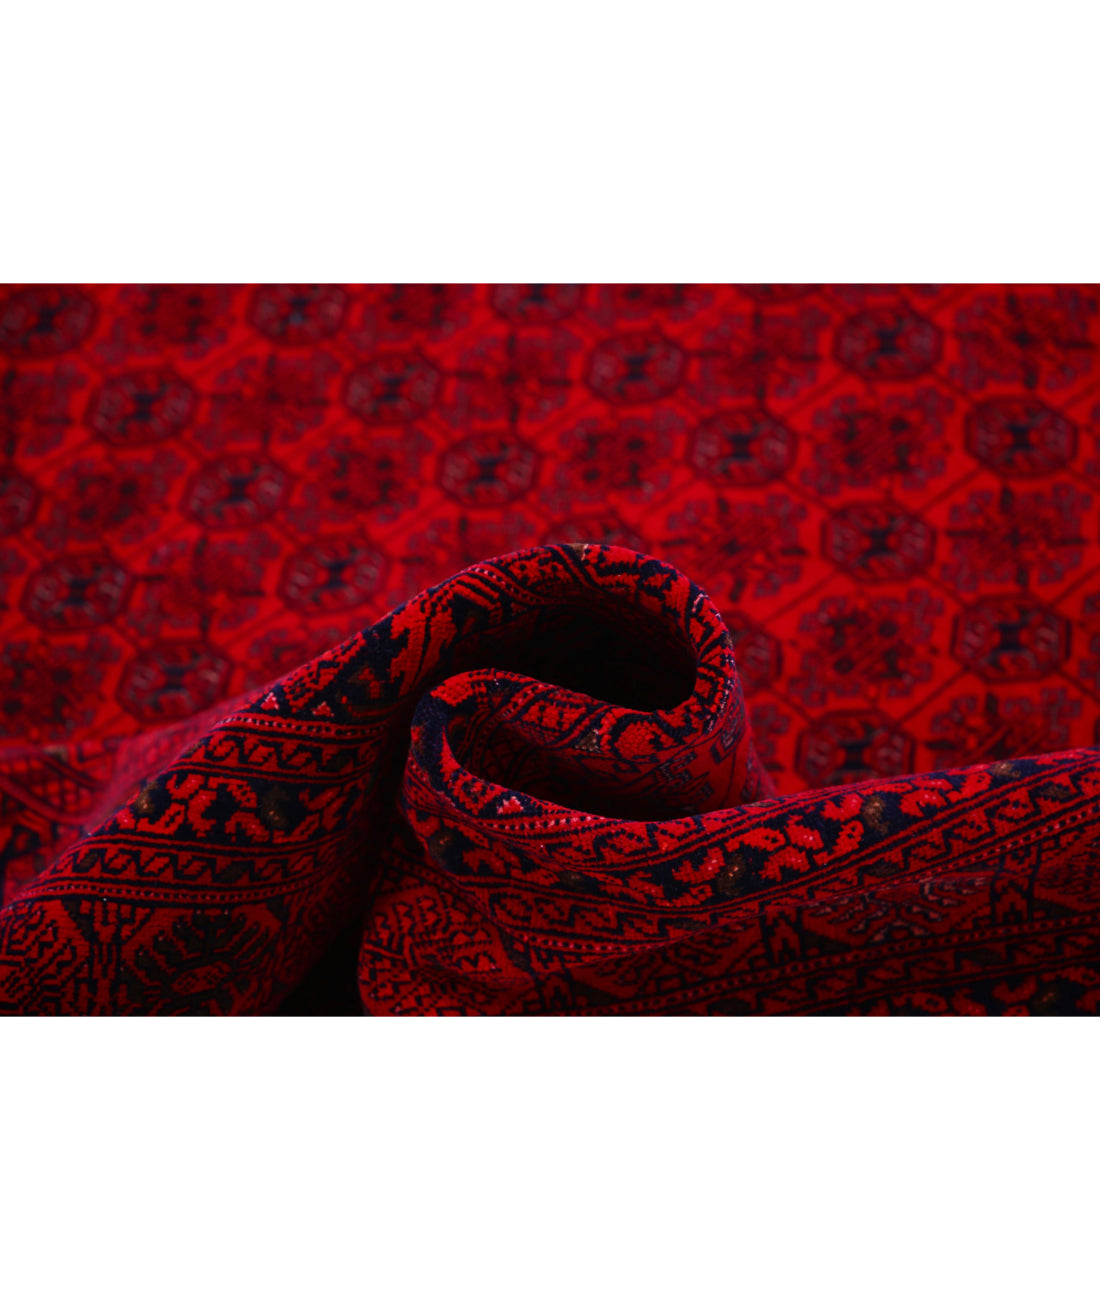 Hand Knotted Afghan Beljik Wool Rug - 7'9'' x 10'8'' 7'9'' x 10'8'' (233 X 320) / Red / Red